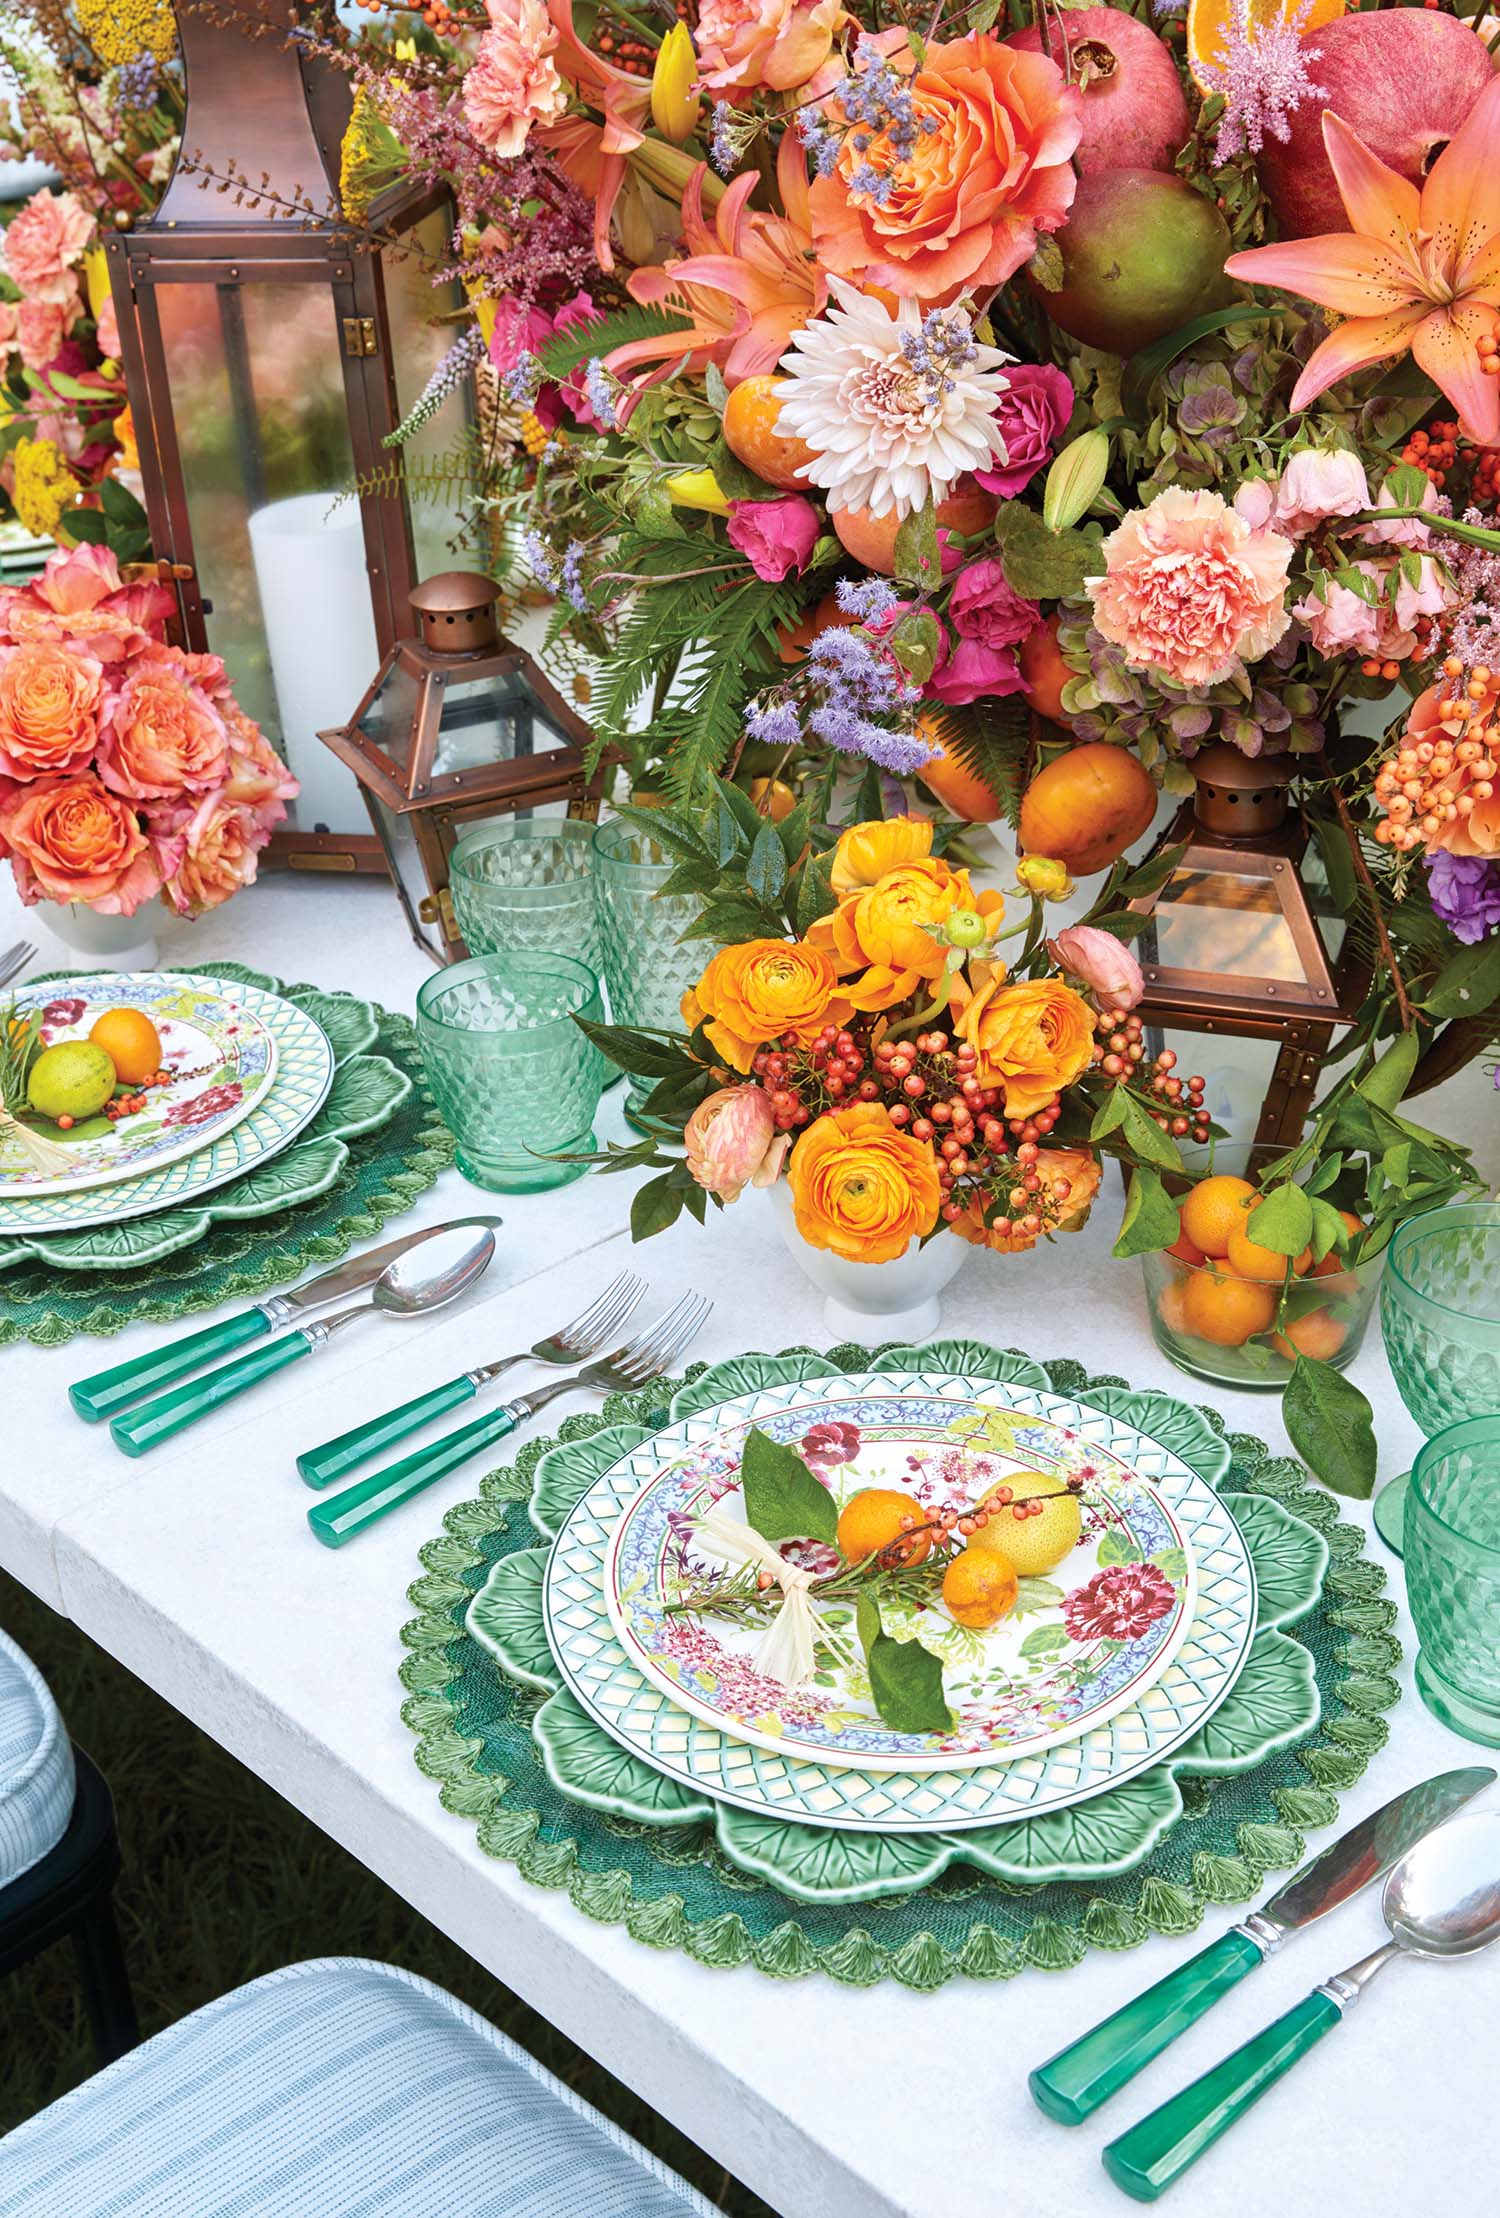 Bright orange and pink flowers adorn a table with turquoise table settings.